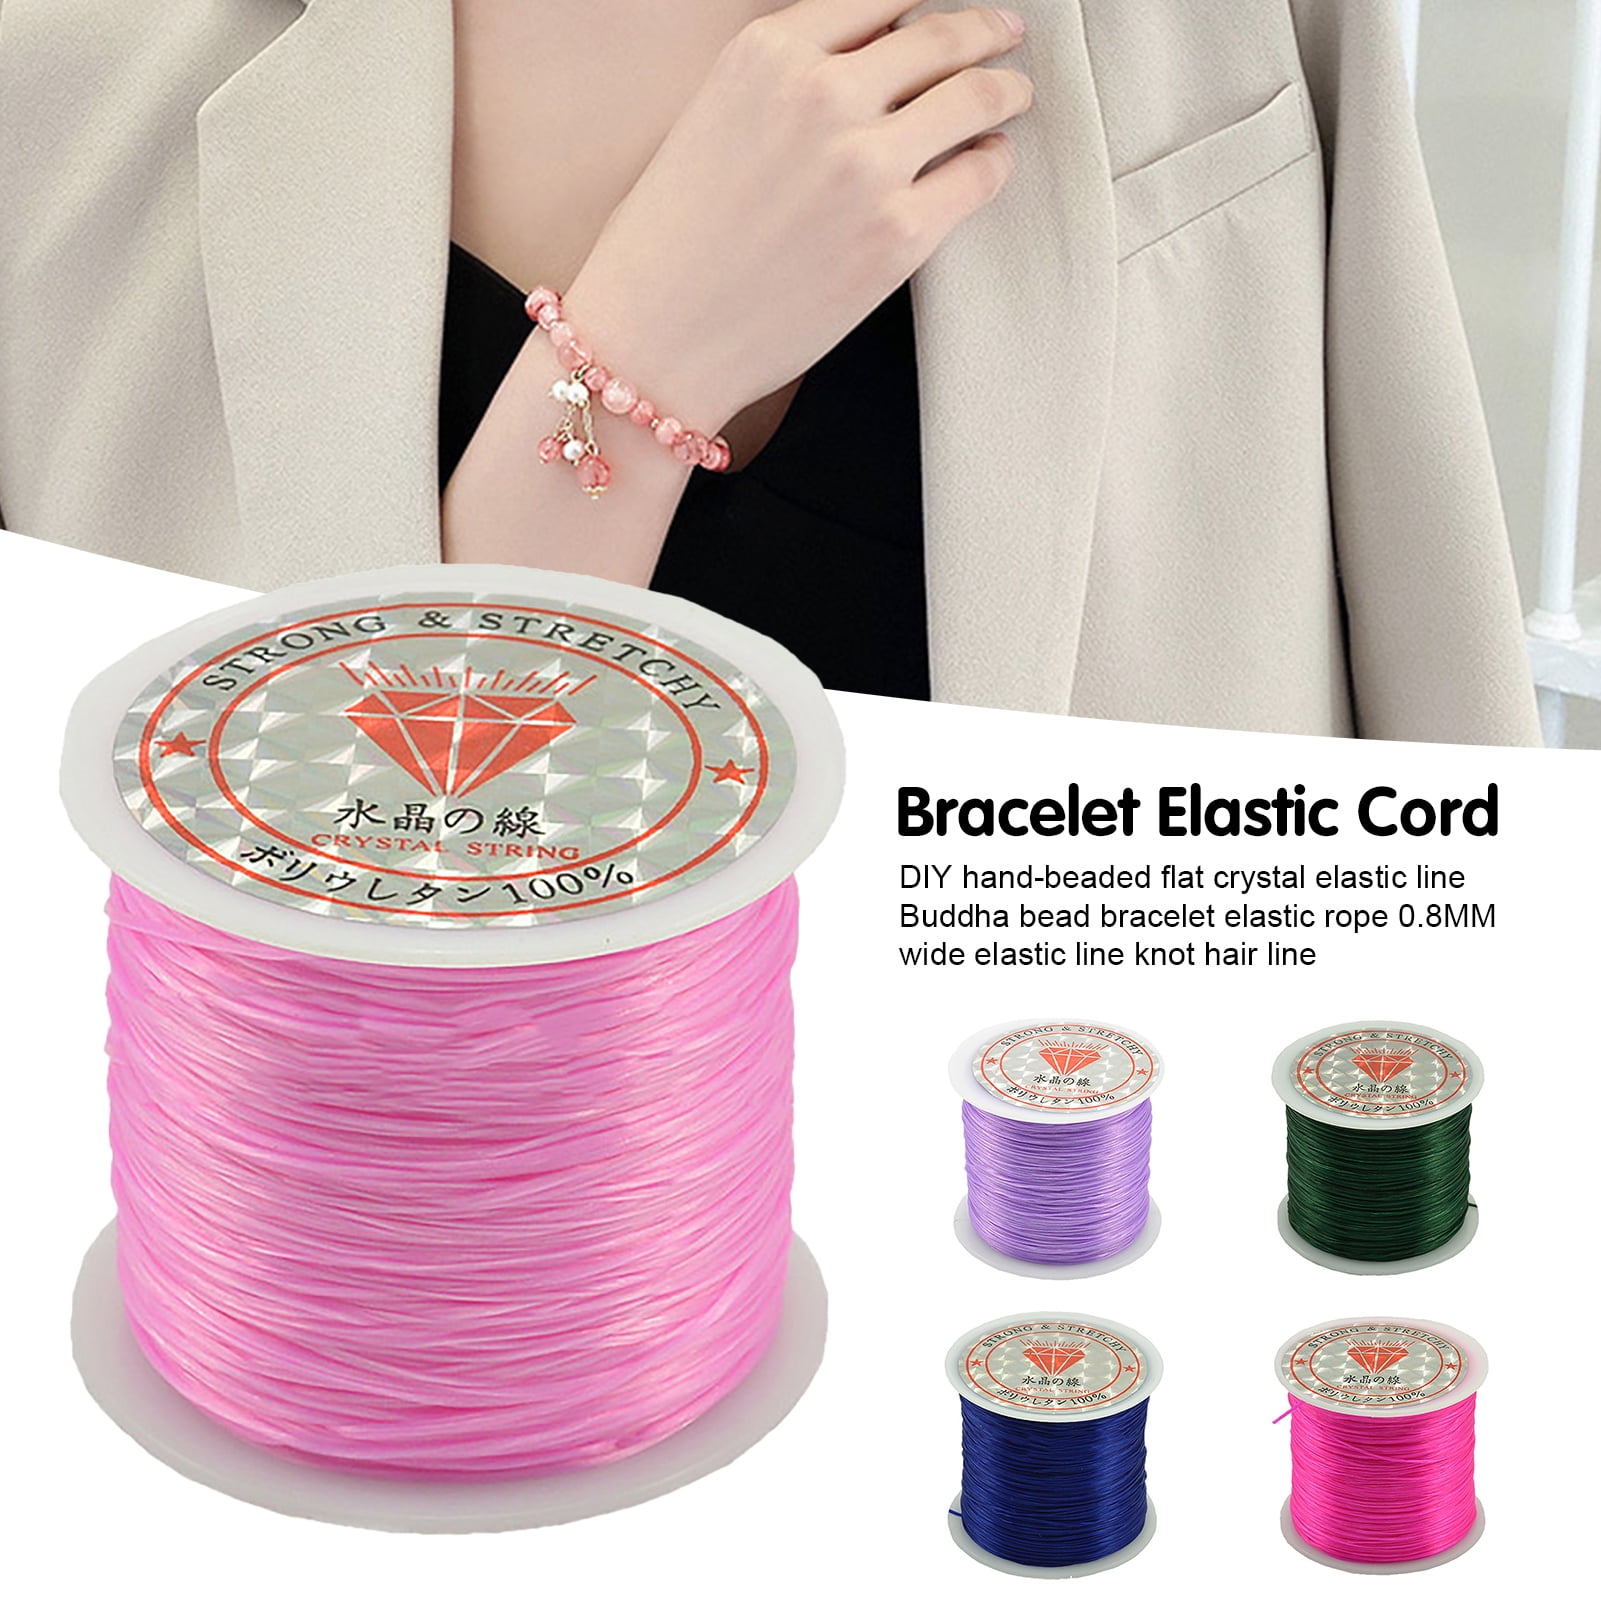 Strong & Stretchy Crystal String Elastic Thread Beading Cord Size 0.8mm